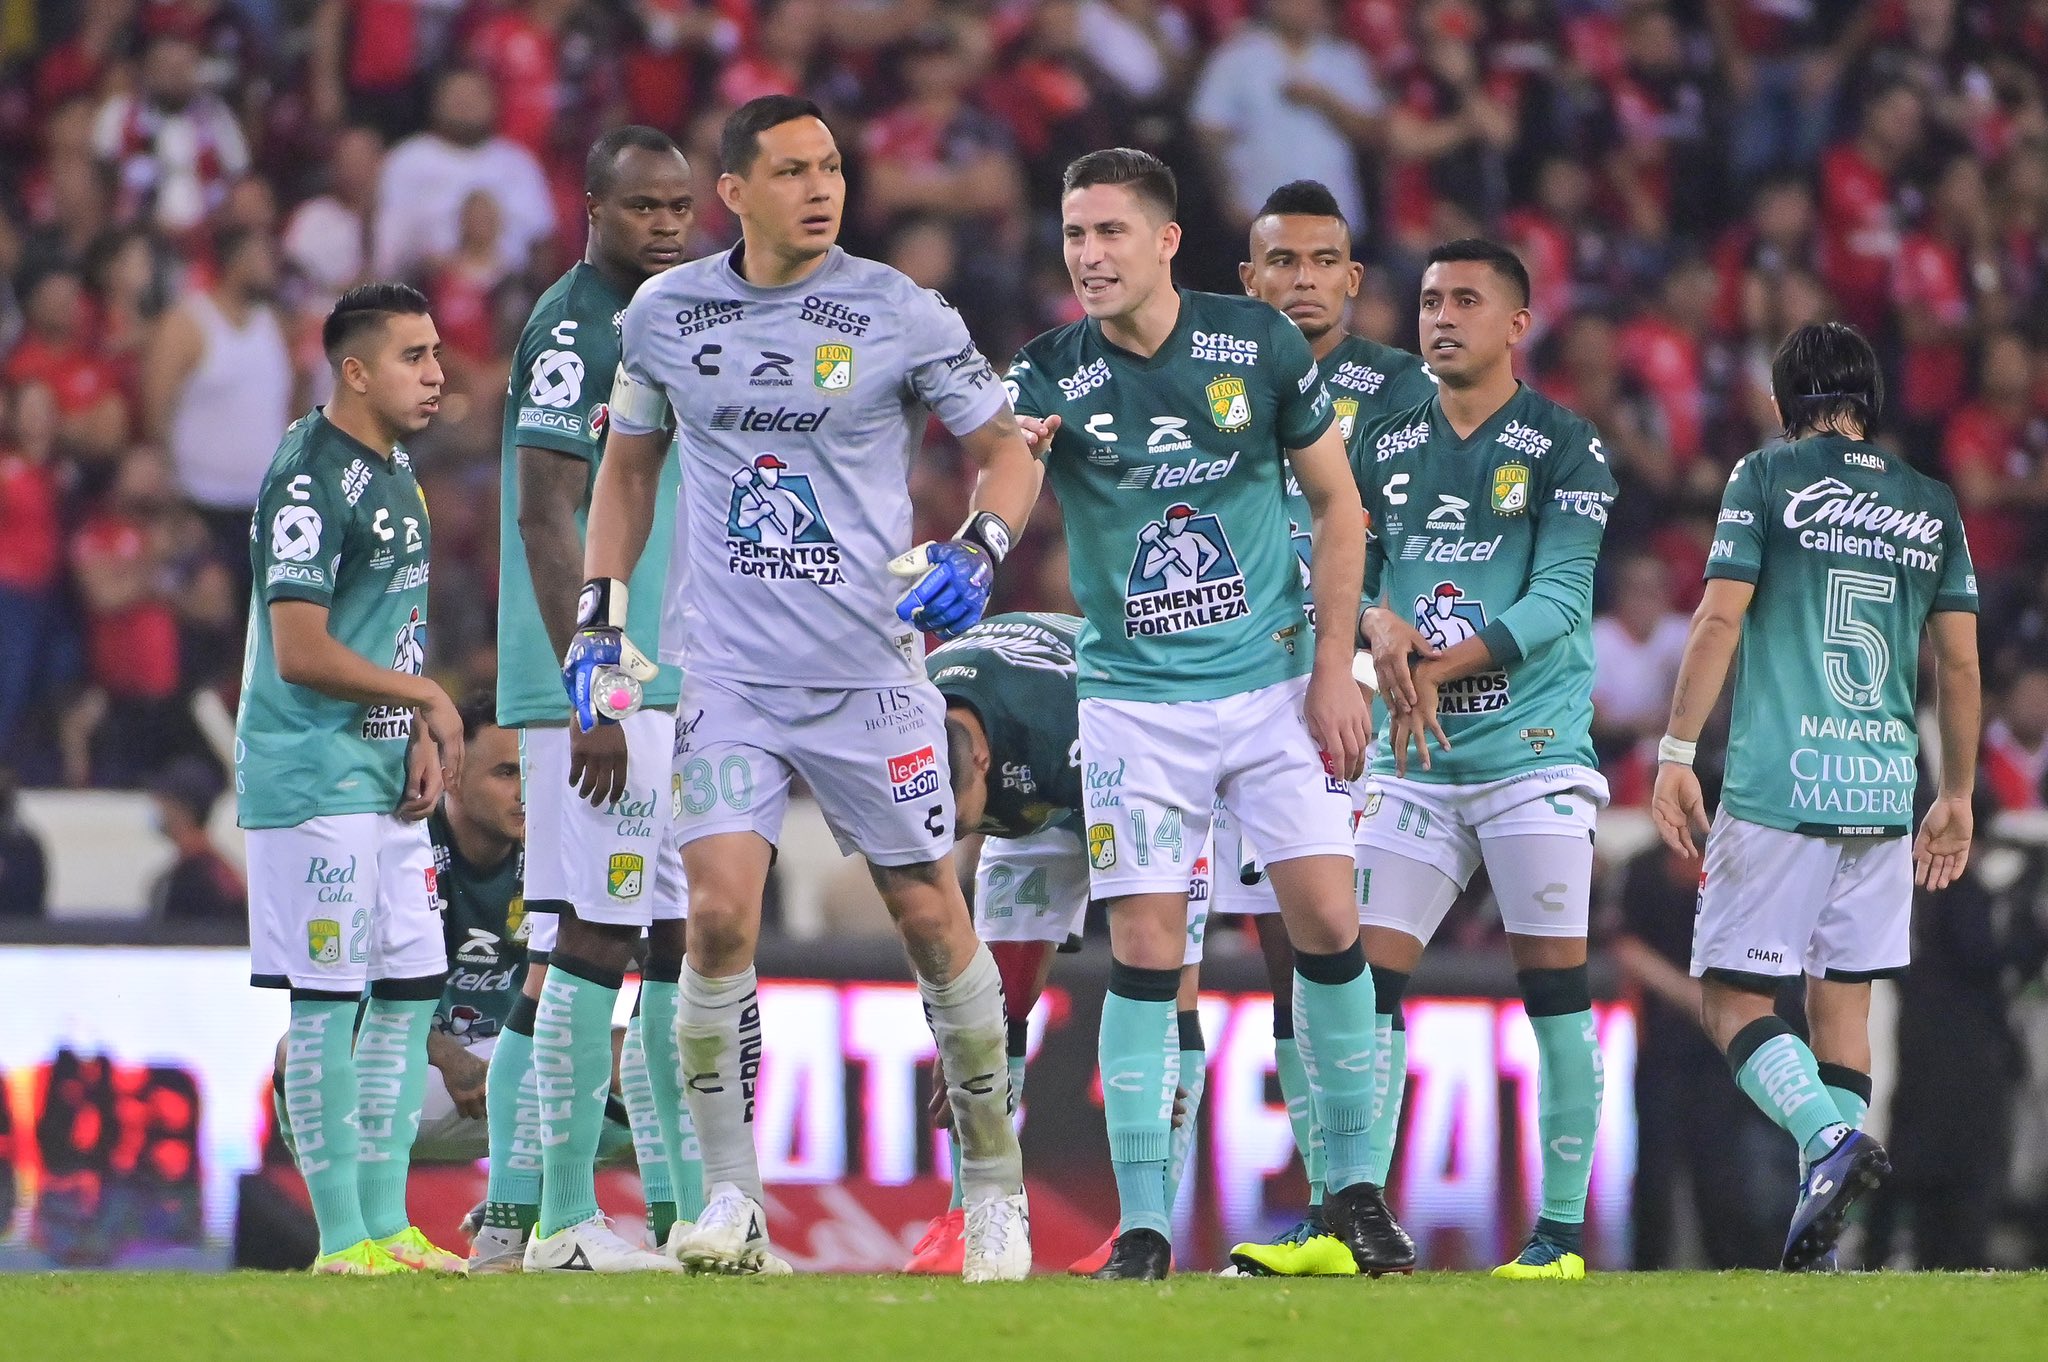 Club Leon restores pride for Liga MX with first Concacaf Champions